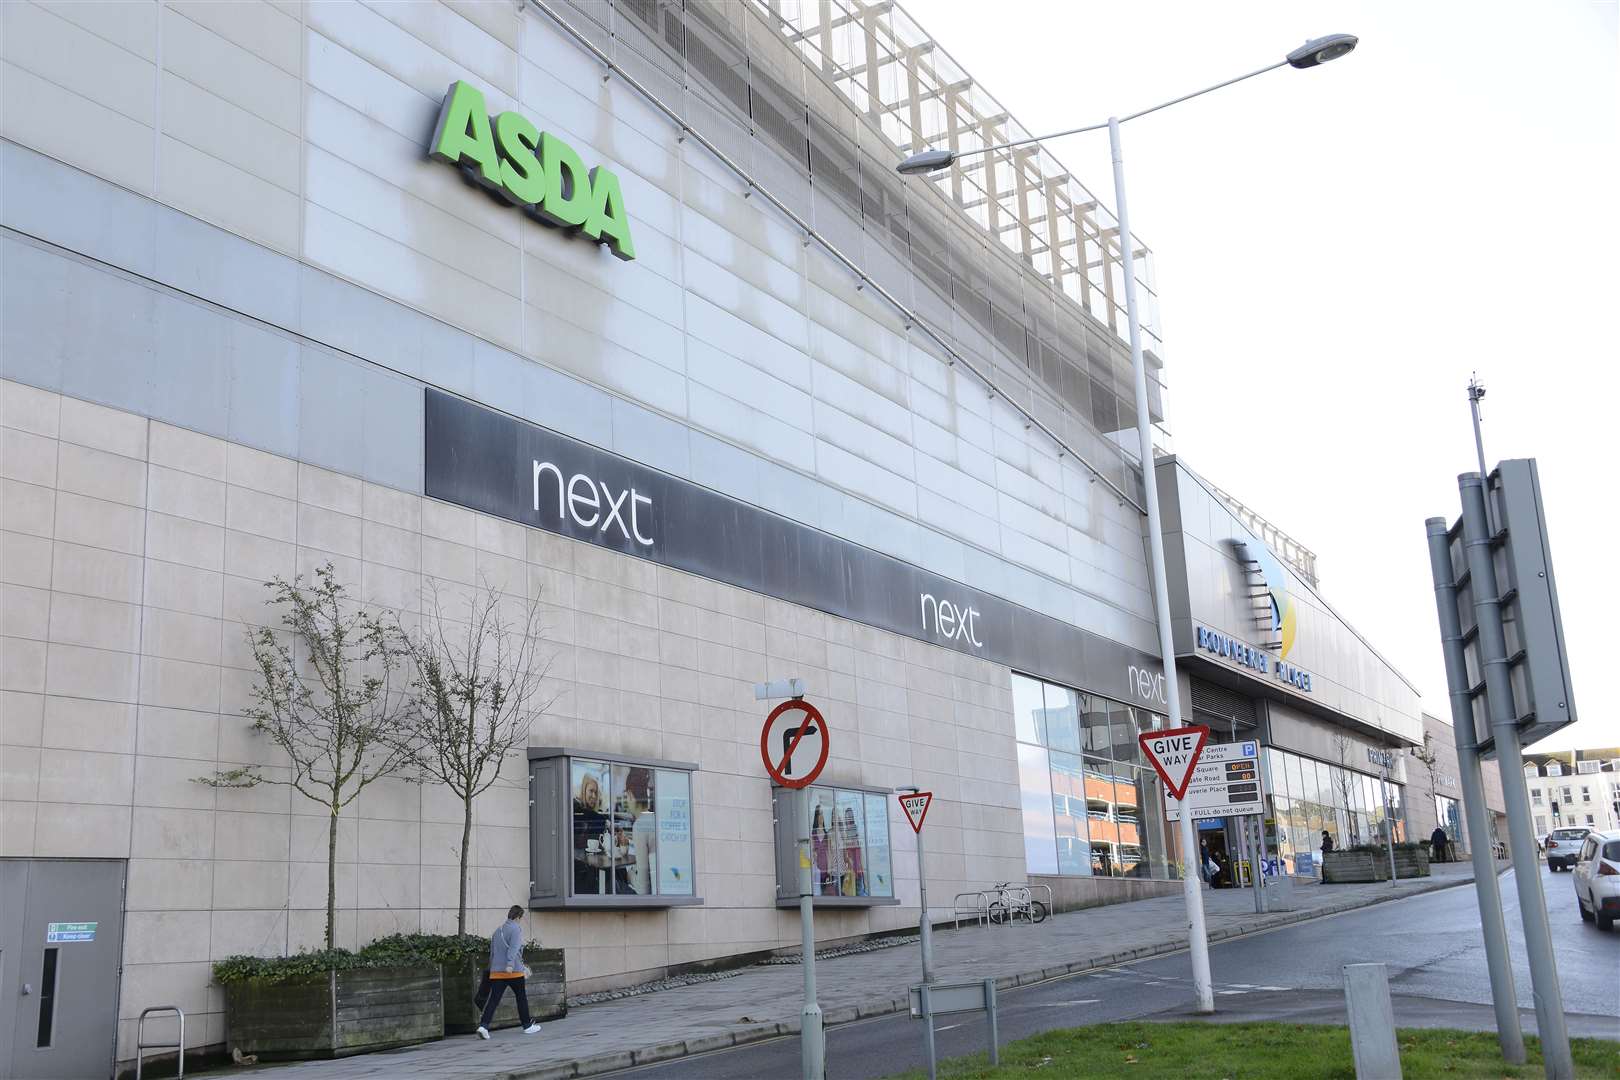 Lottery services have been suspended at Folkestone's Asda store